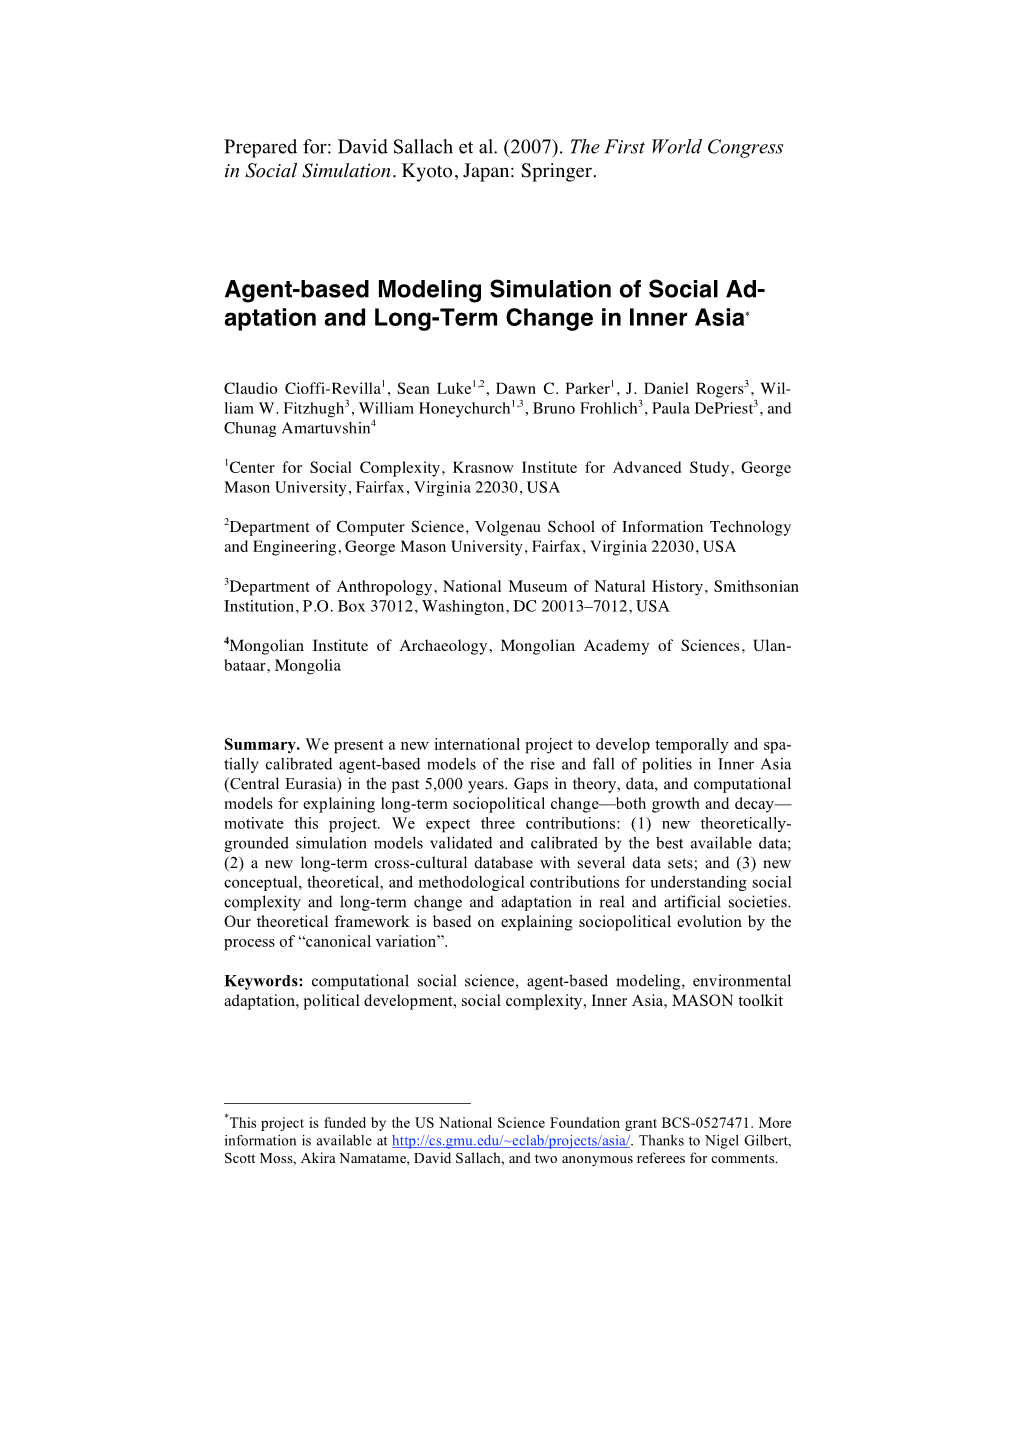 Agent-Based Modeling Simulation of Social Ad- Aptation and Long-Term Change in Inner Asia*